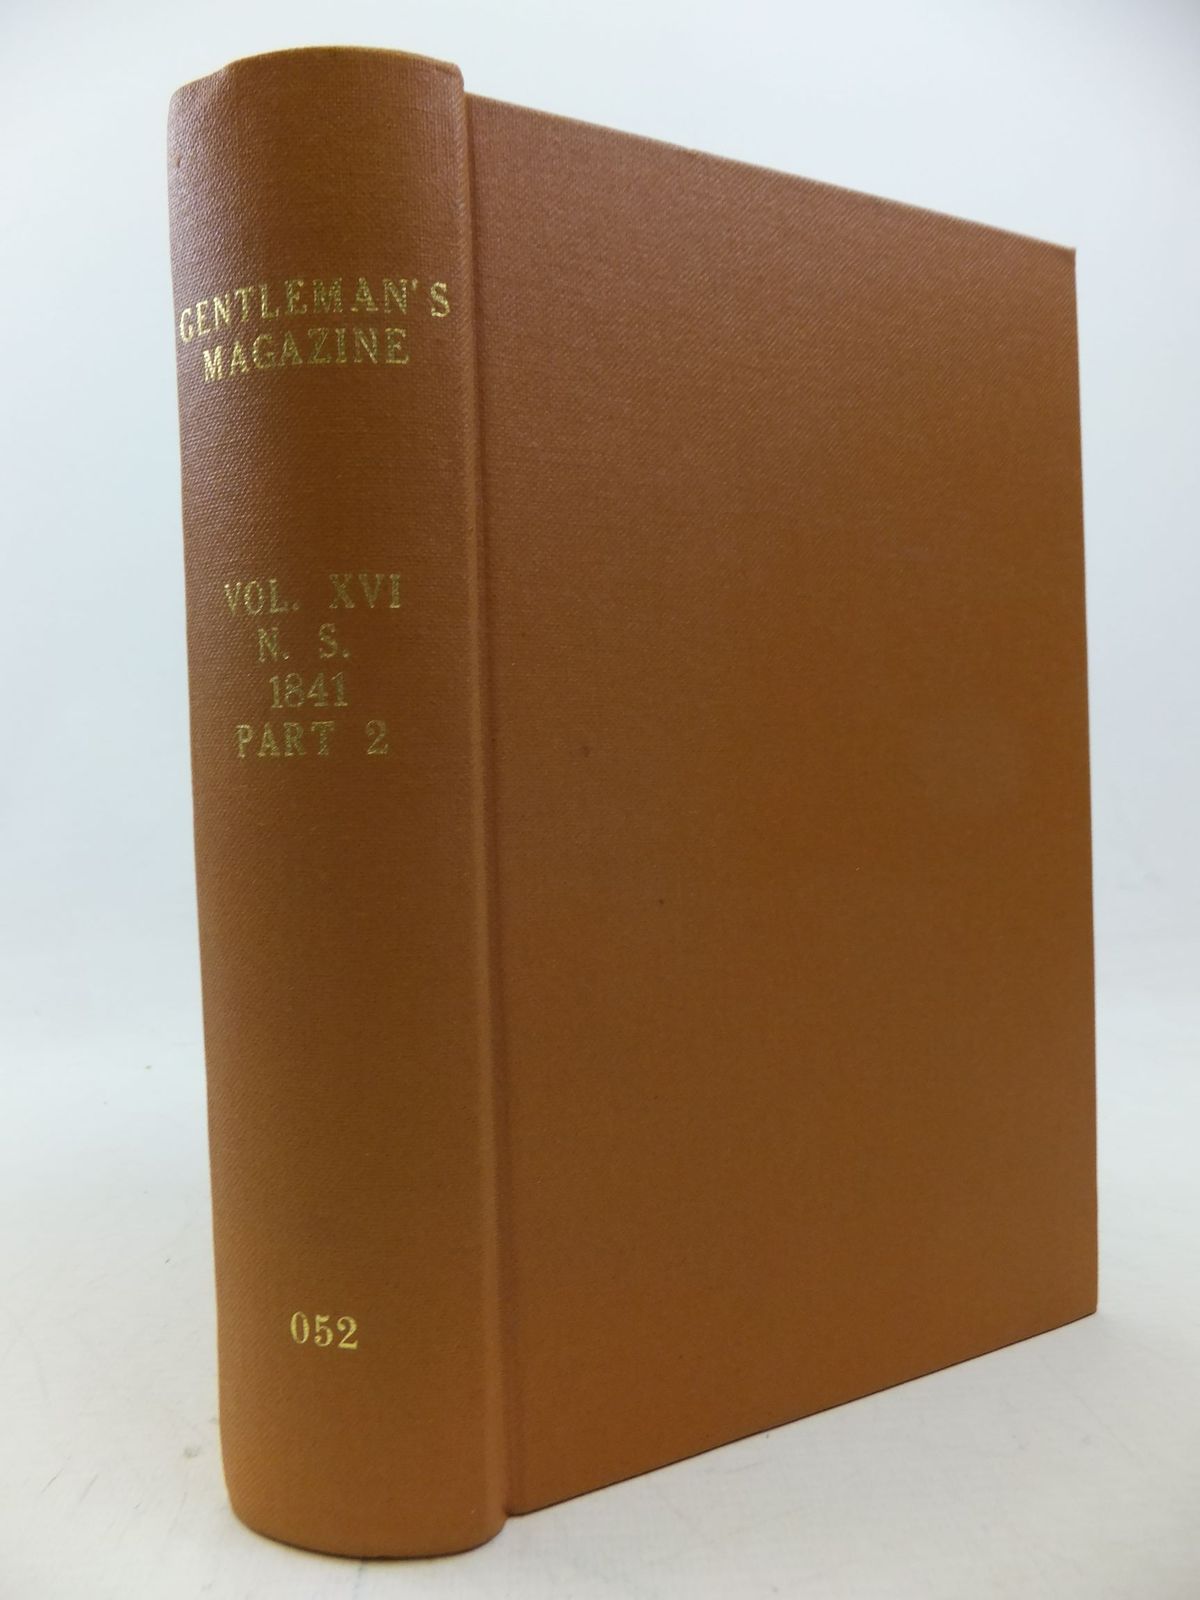 Photo of THE GENTLEMAN'S MAGAZINE VOLUME XVI 1841 written by Urban, Sylvanus published by William Pickering, John Bowyer Nichols And Son (STOCK CODE: 1710405)  for sale by Stella & Rose's Books